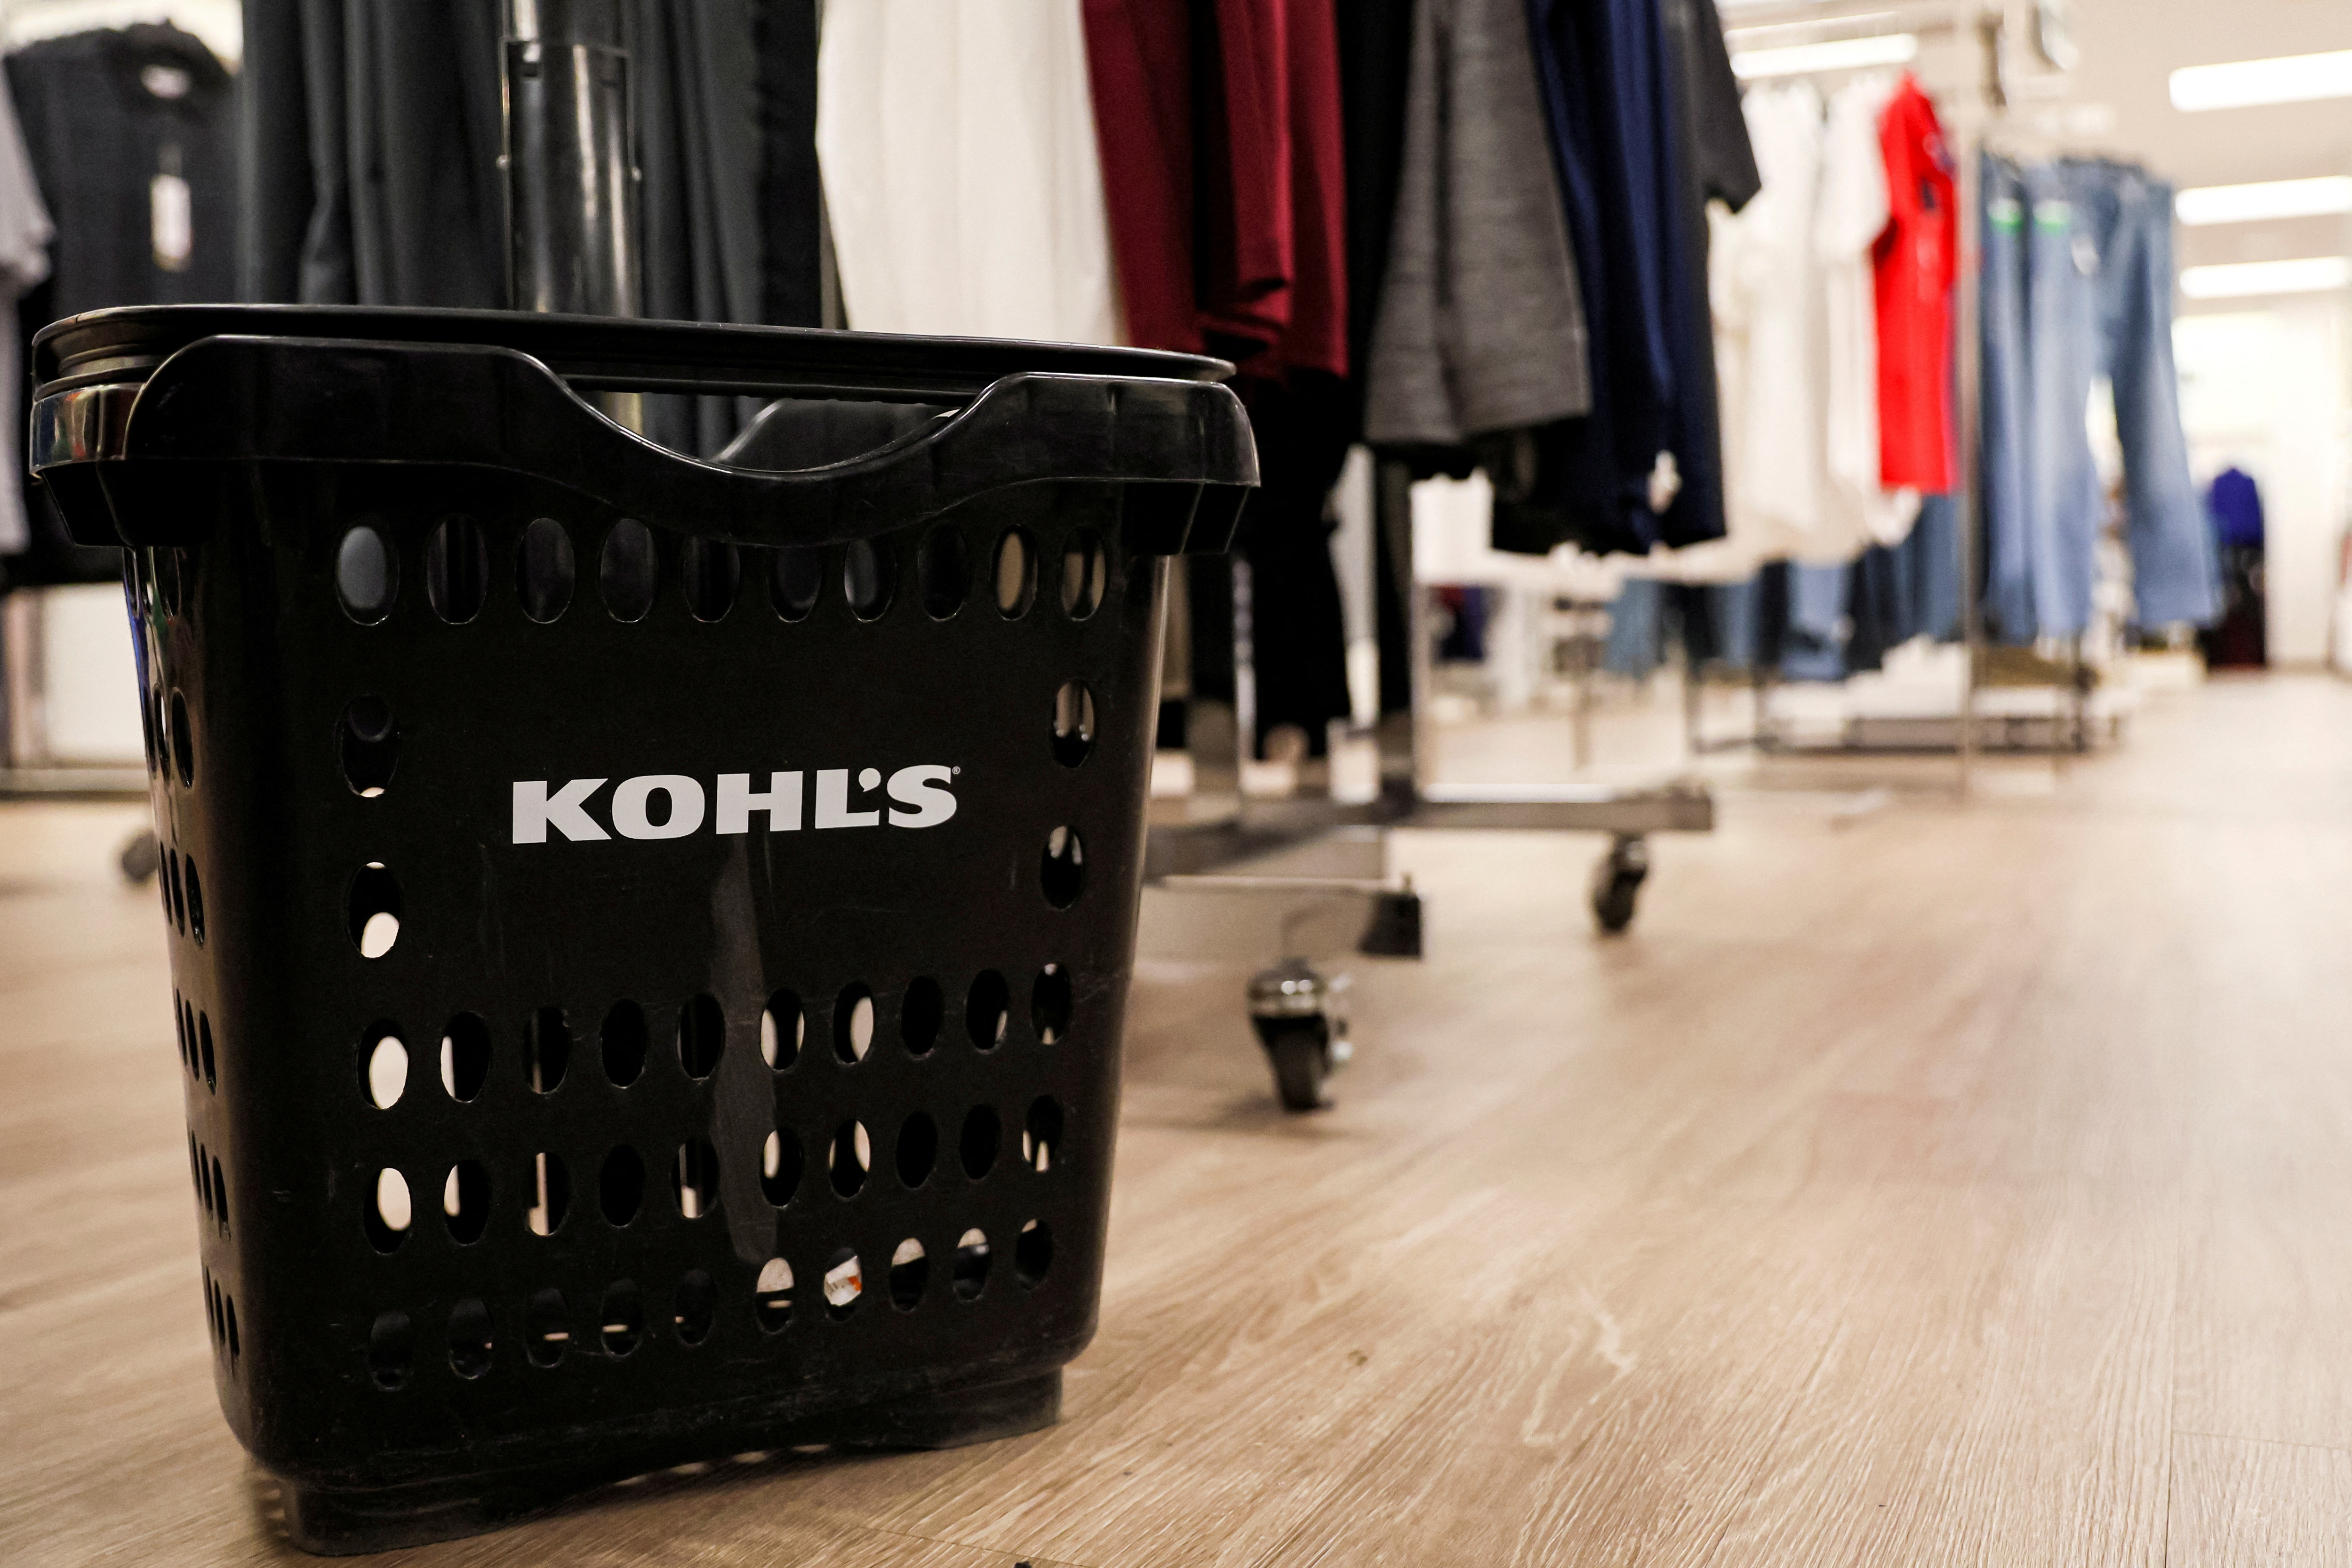 Kohl's CEO pitches retailer's turnaround efforts after surprise loss